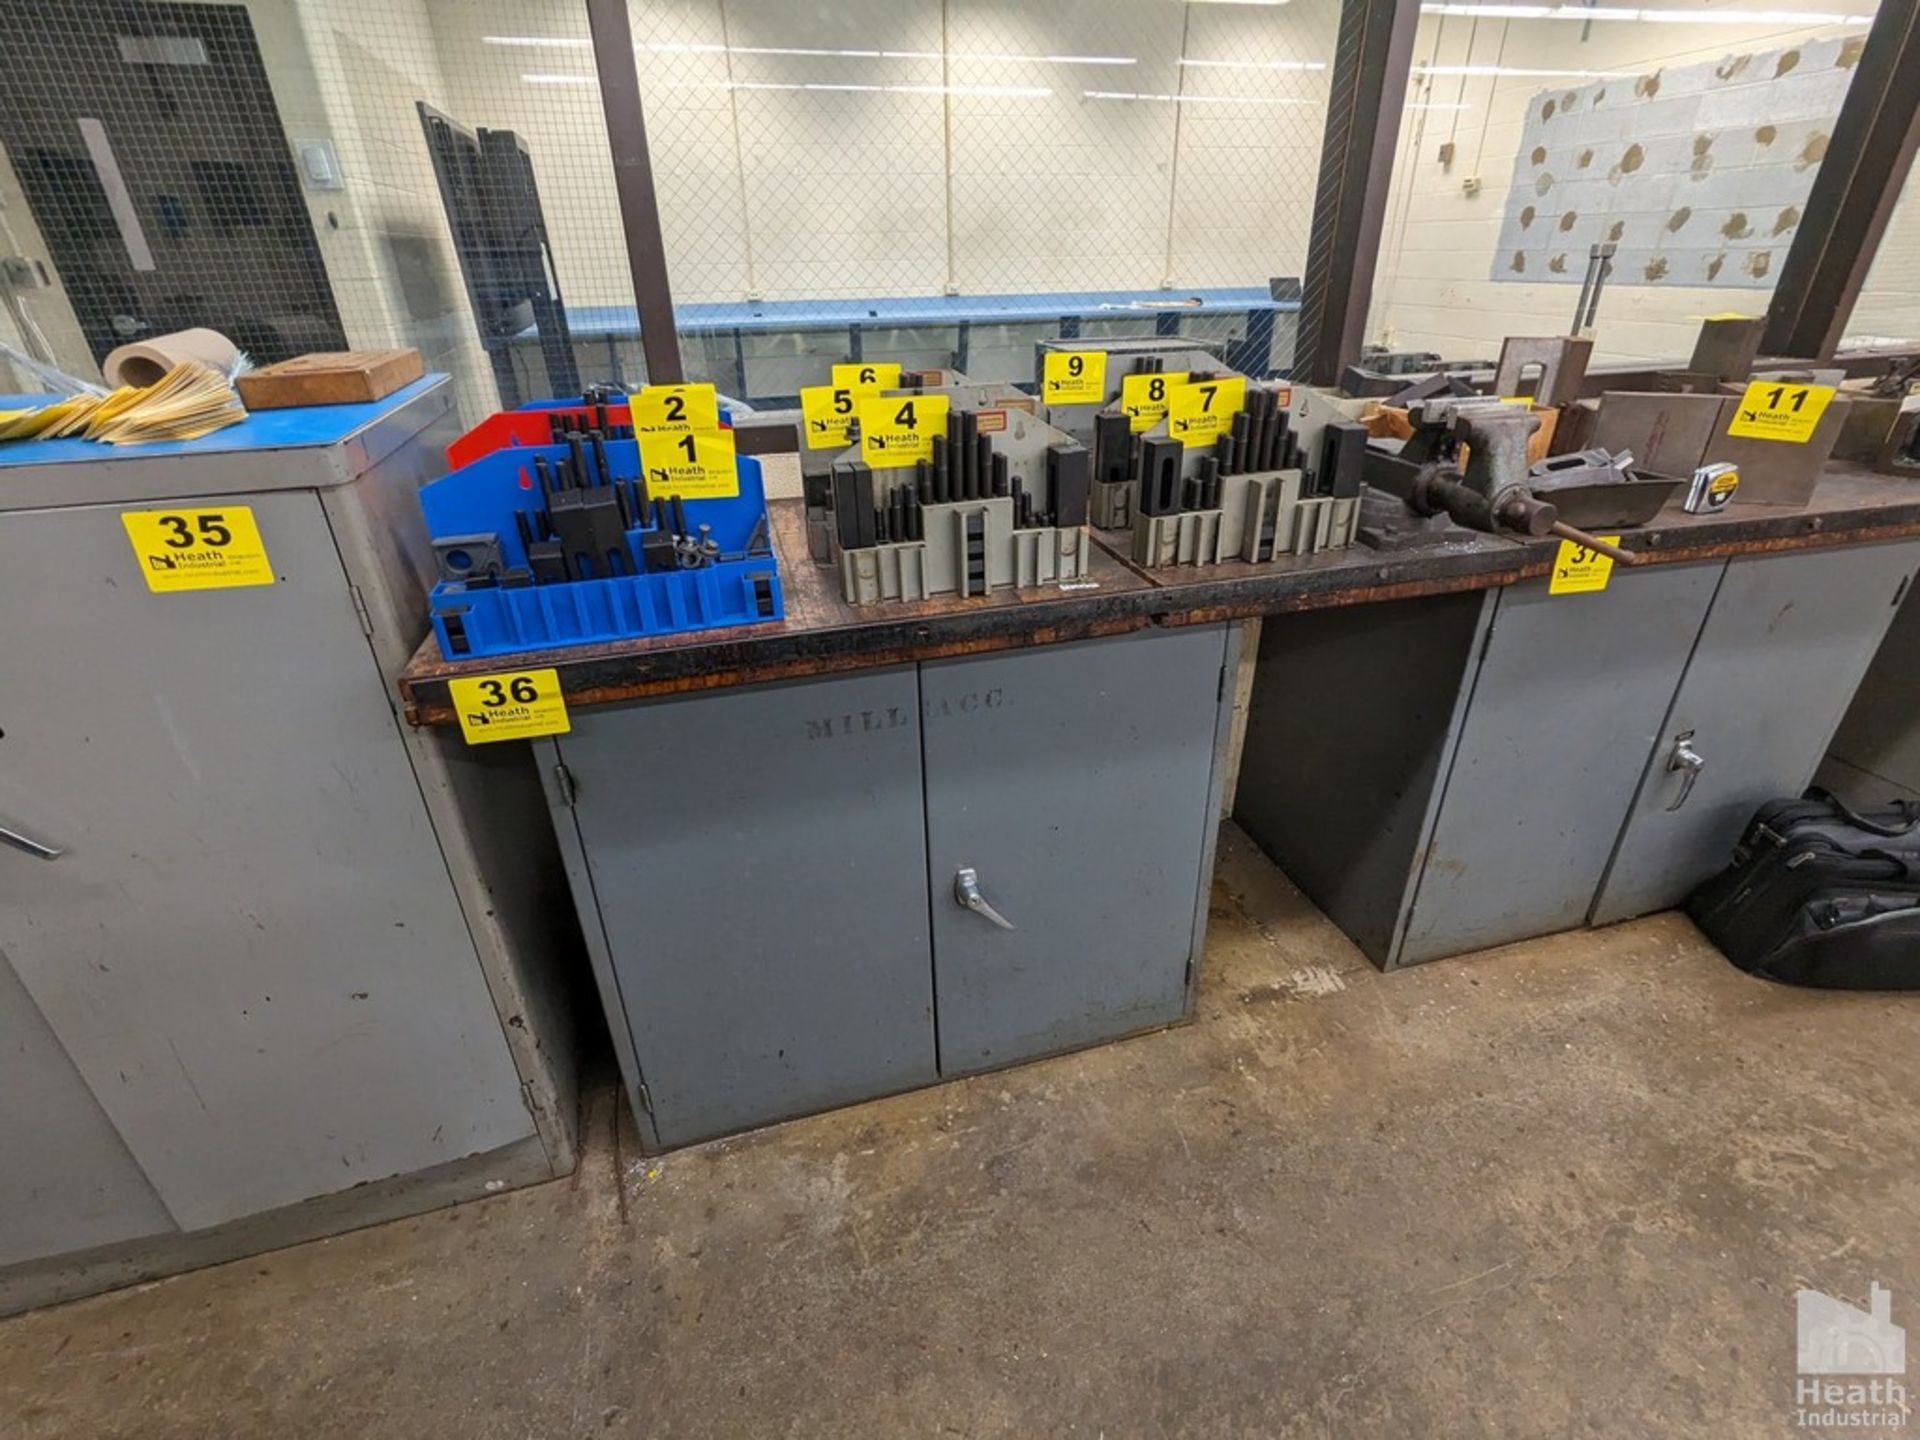 CABINET BASED WORKBENCH WITH 4" BULLET- STYLE VISE 52" X 24" X 33" Loading Fee :$125